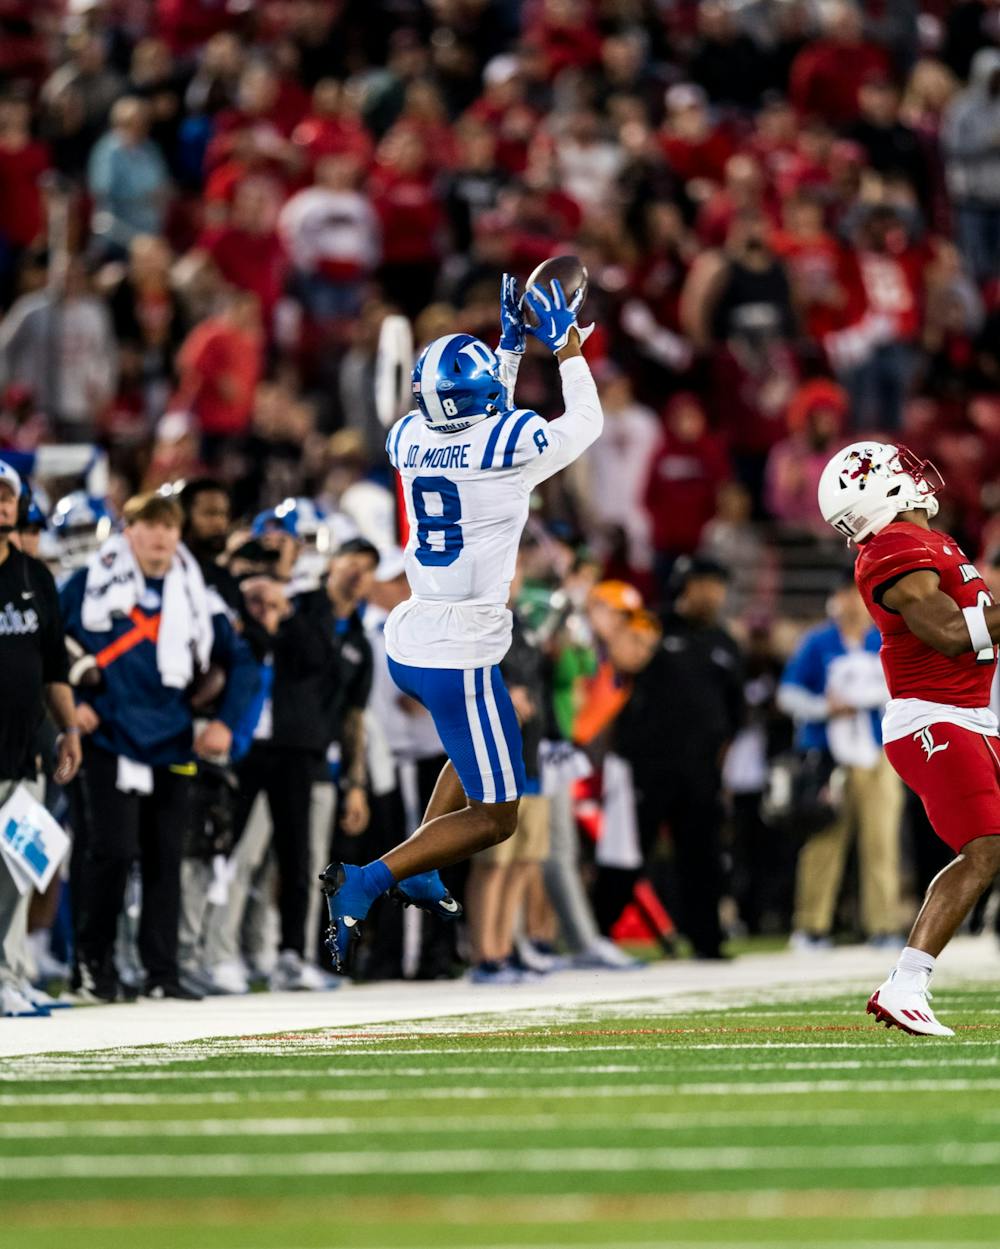 Jordan Moore hauls in a pass during Duke's loss to Louisville.